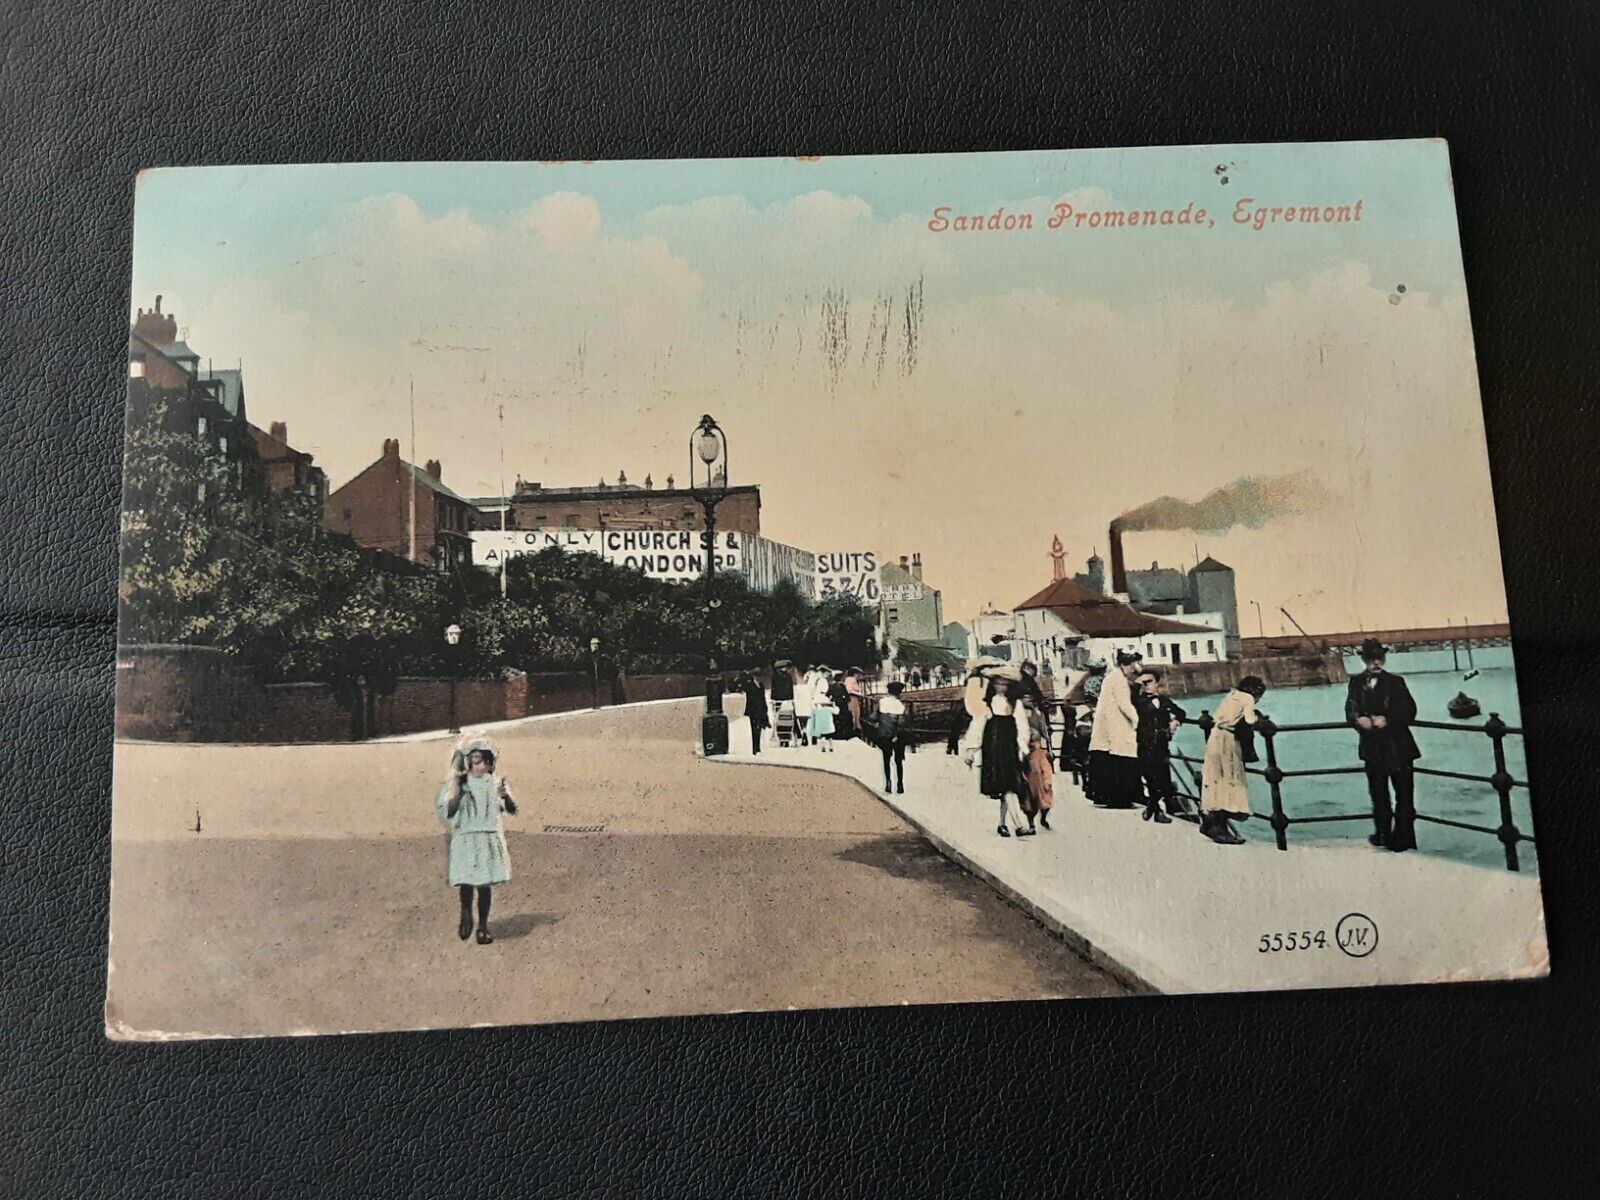 House Clearance - Old Valentines service of Sandon Promenade, Egremont, Cumbria posted 1907